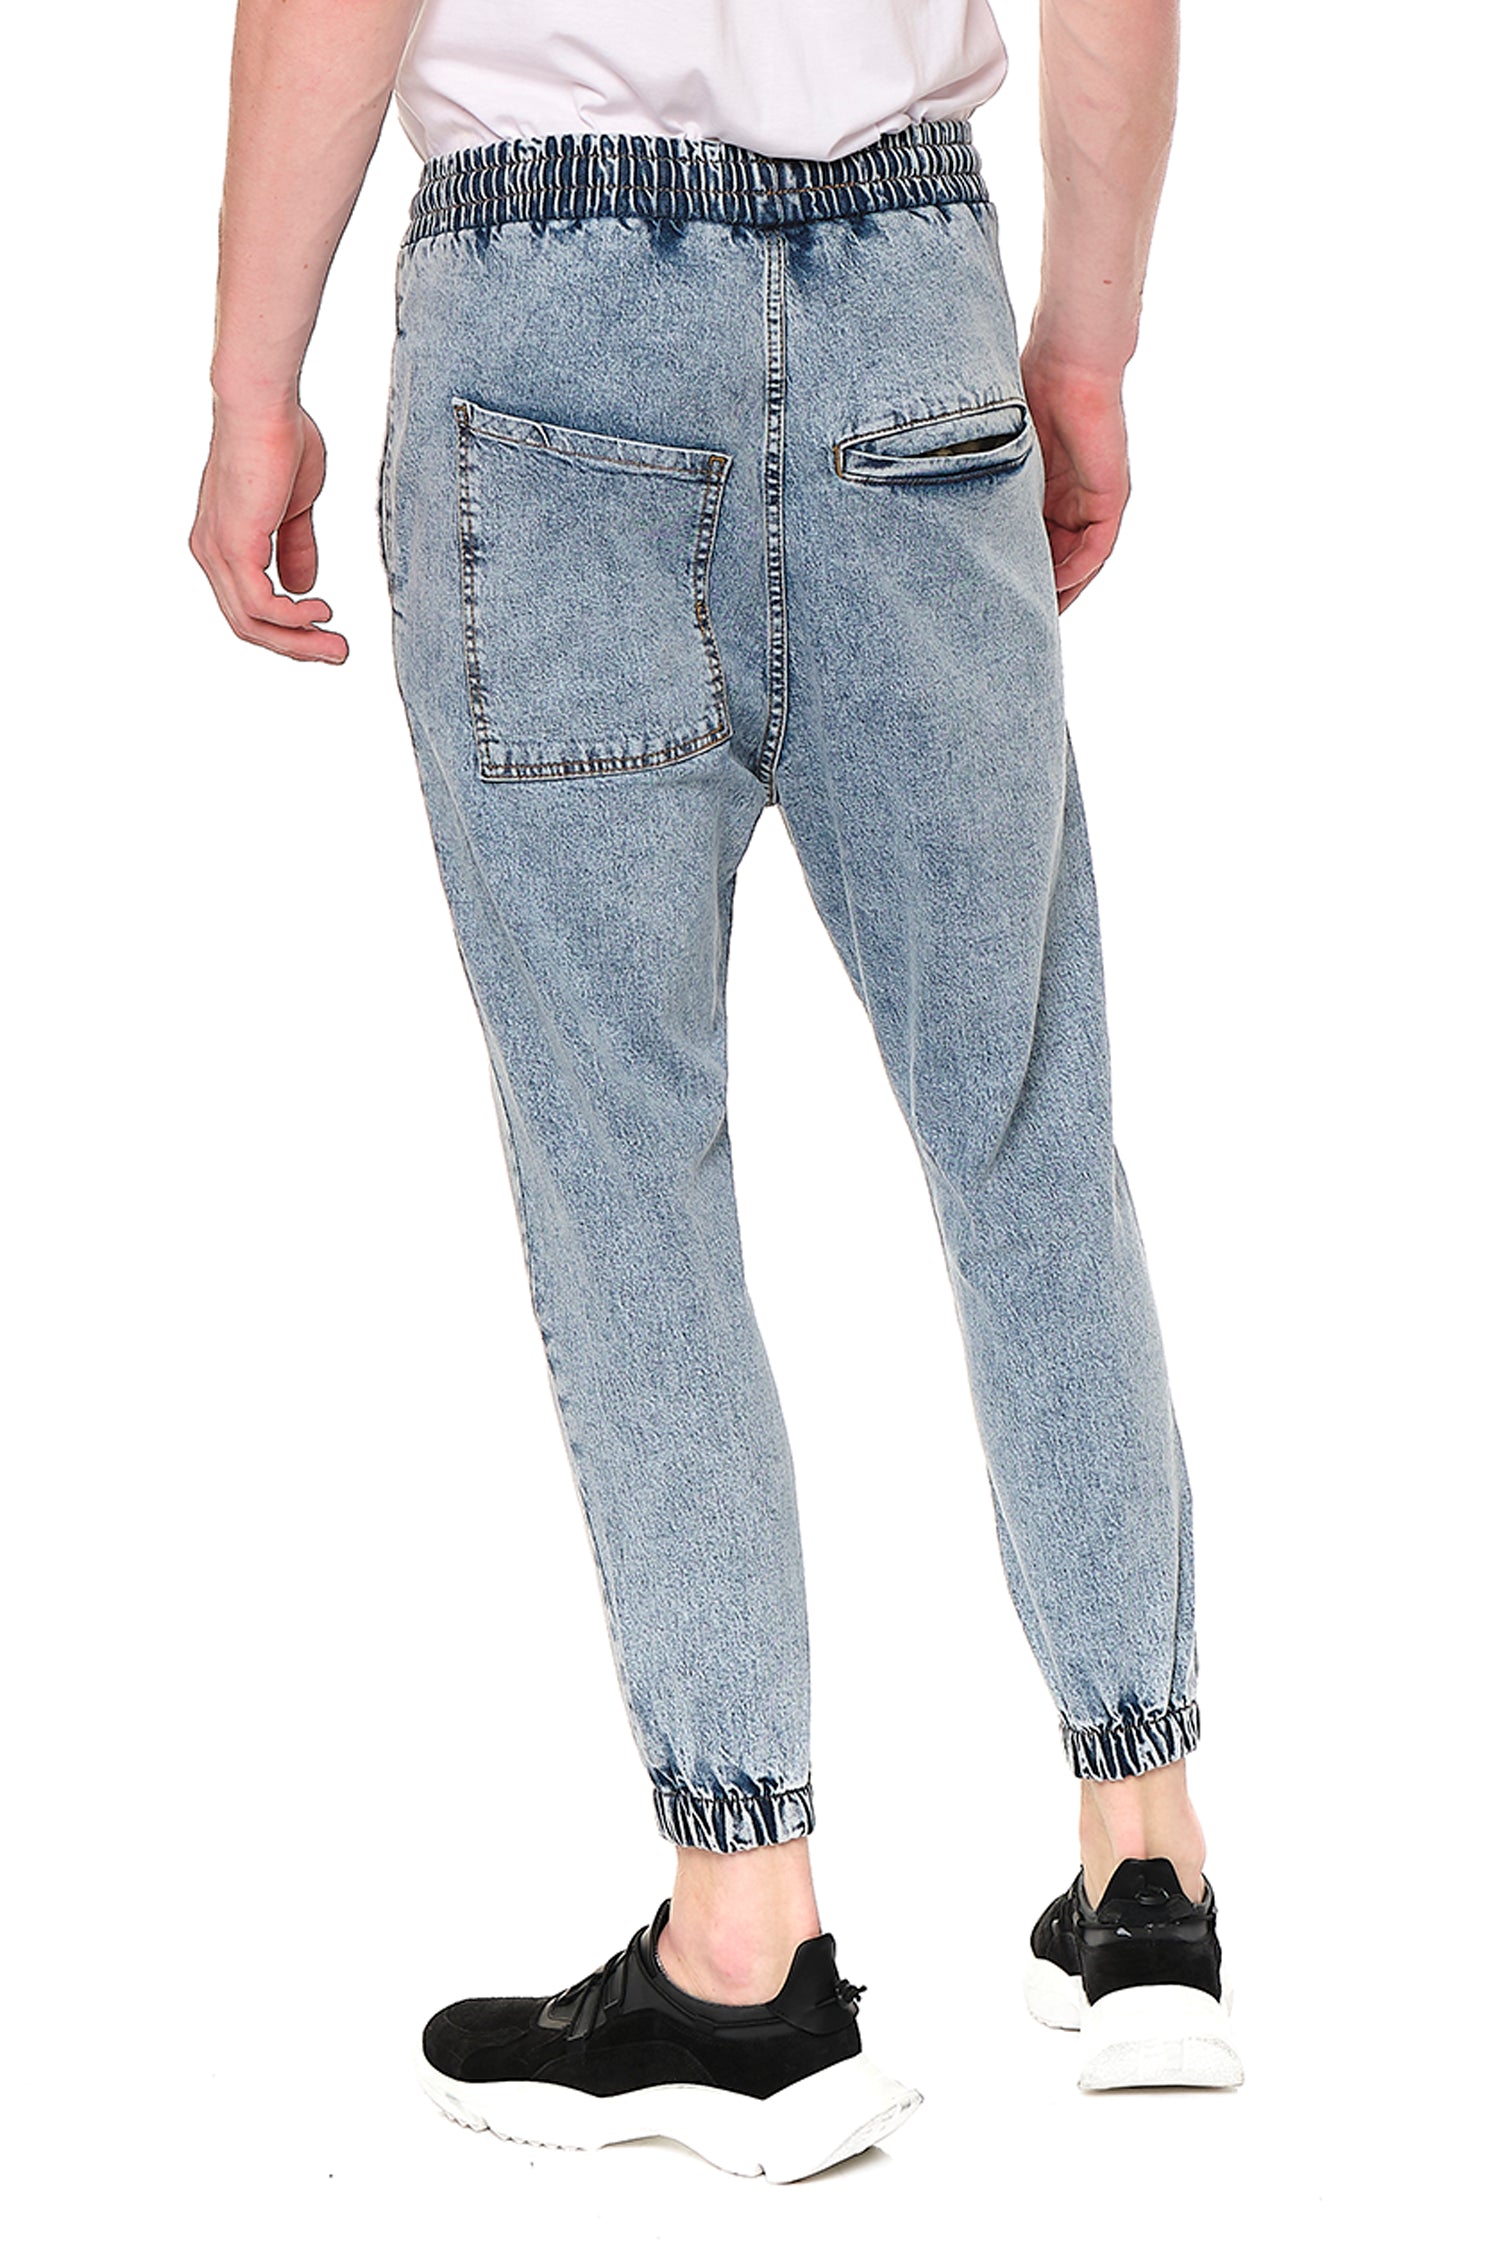 Acid Wash Blue Denim Jeans | Pants the will outlast & perform | George Hats